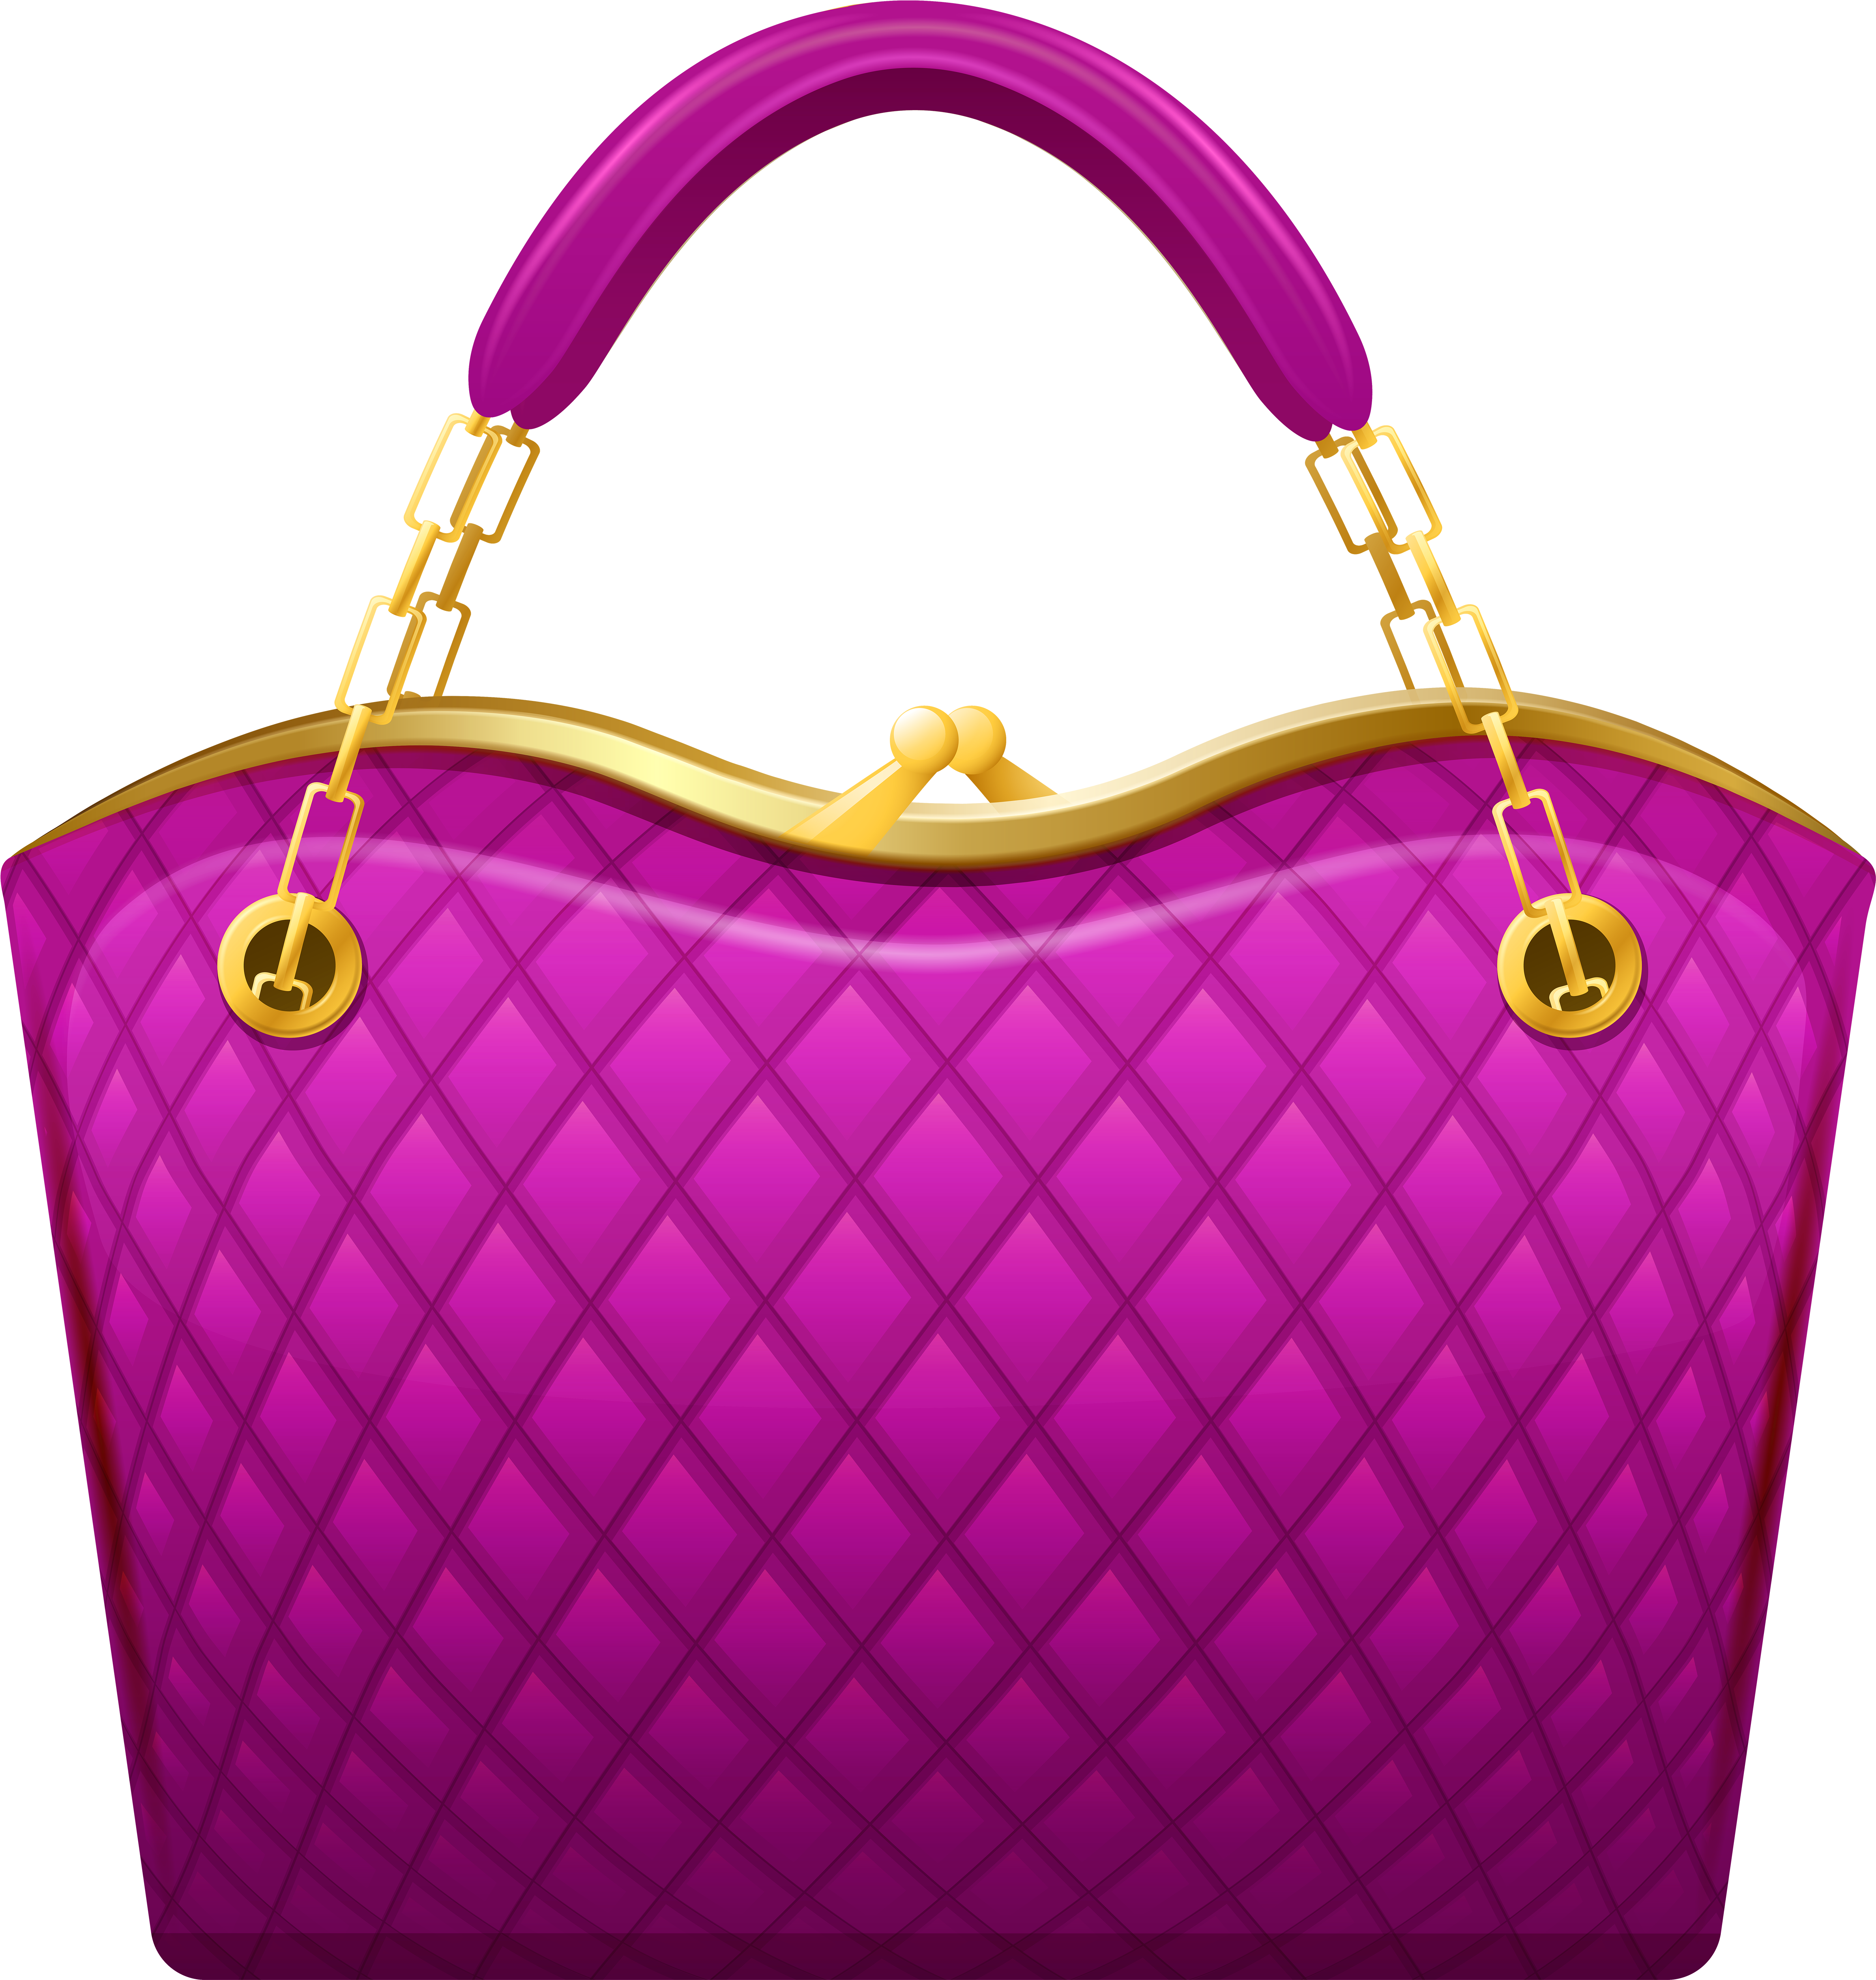 A Purple Purse With Gold Handles